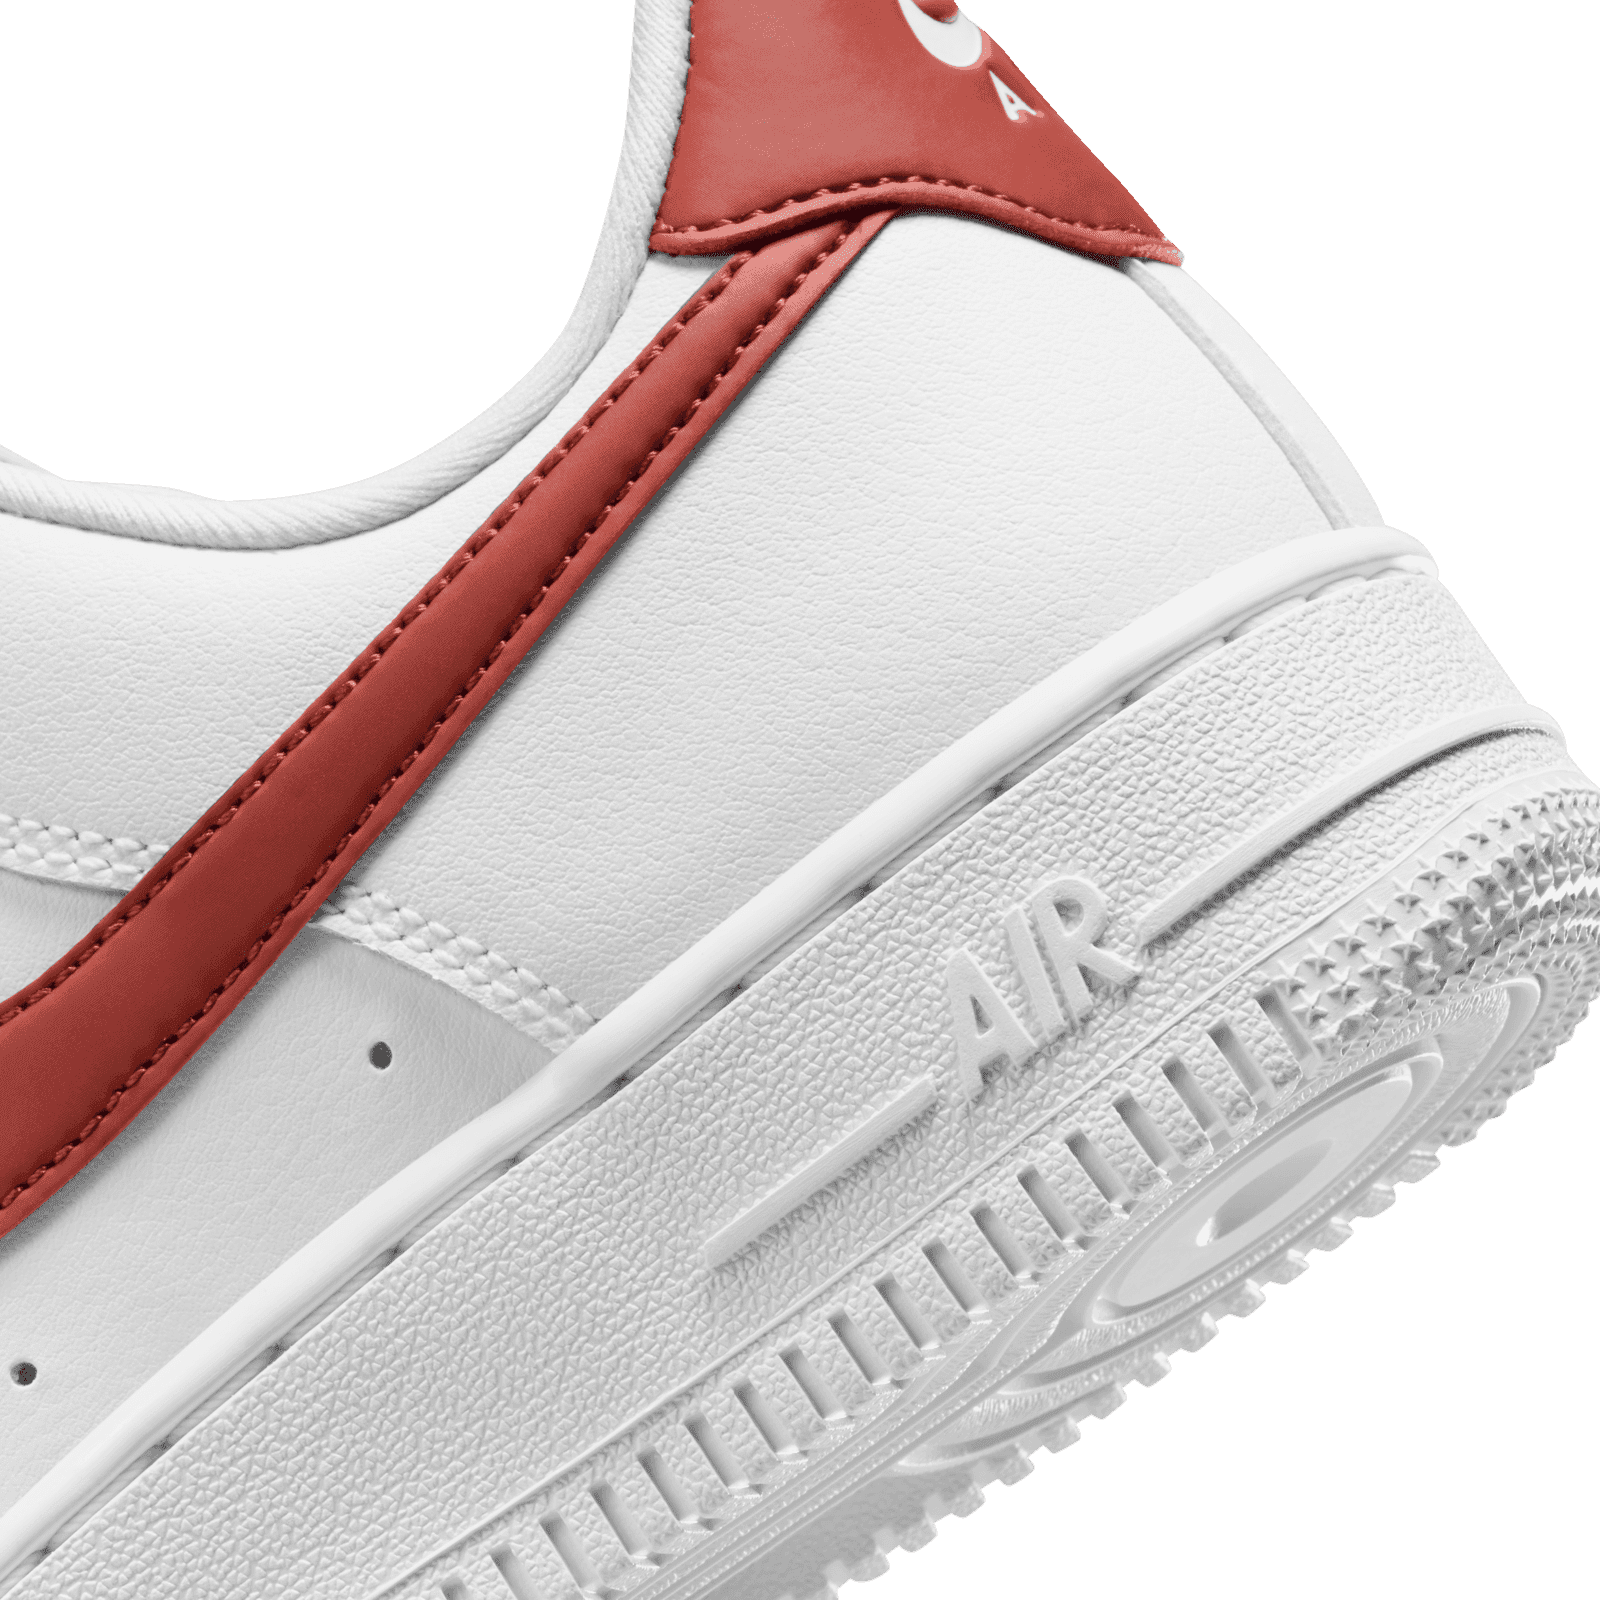 The Women's Nike Air Force 1 Low White Rugged Orange Releases November 2023